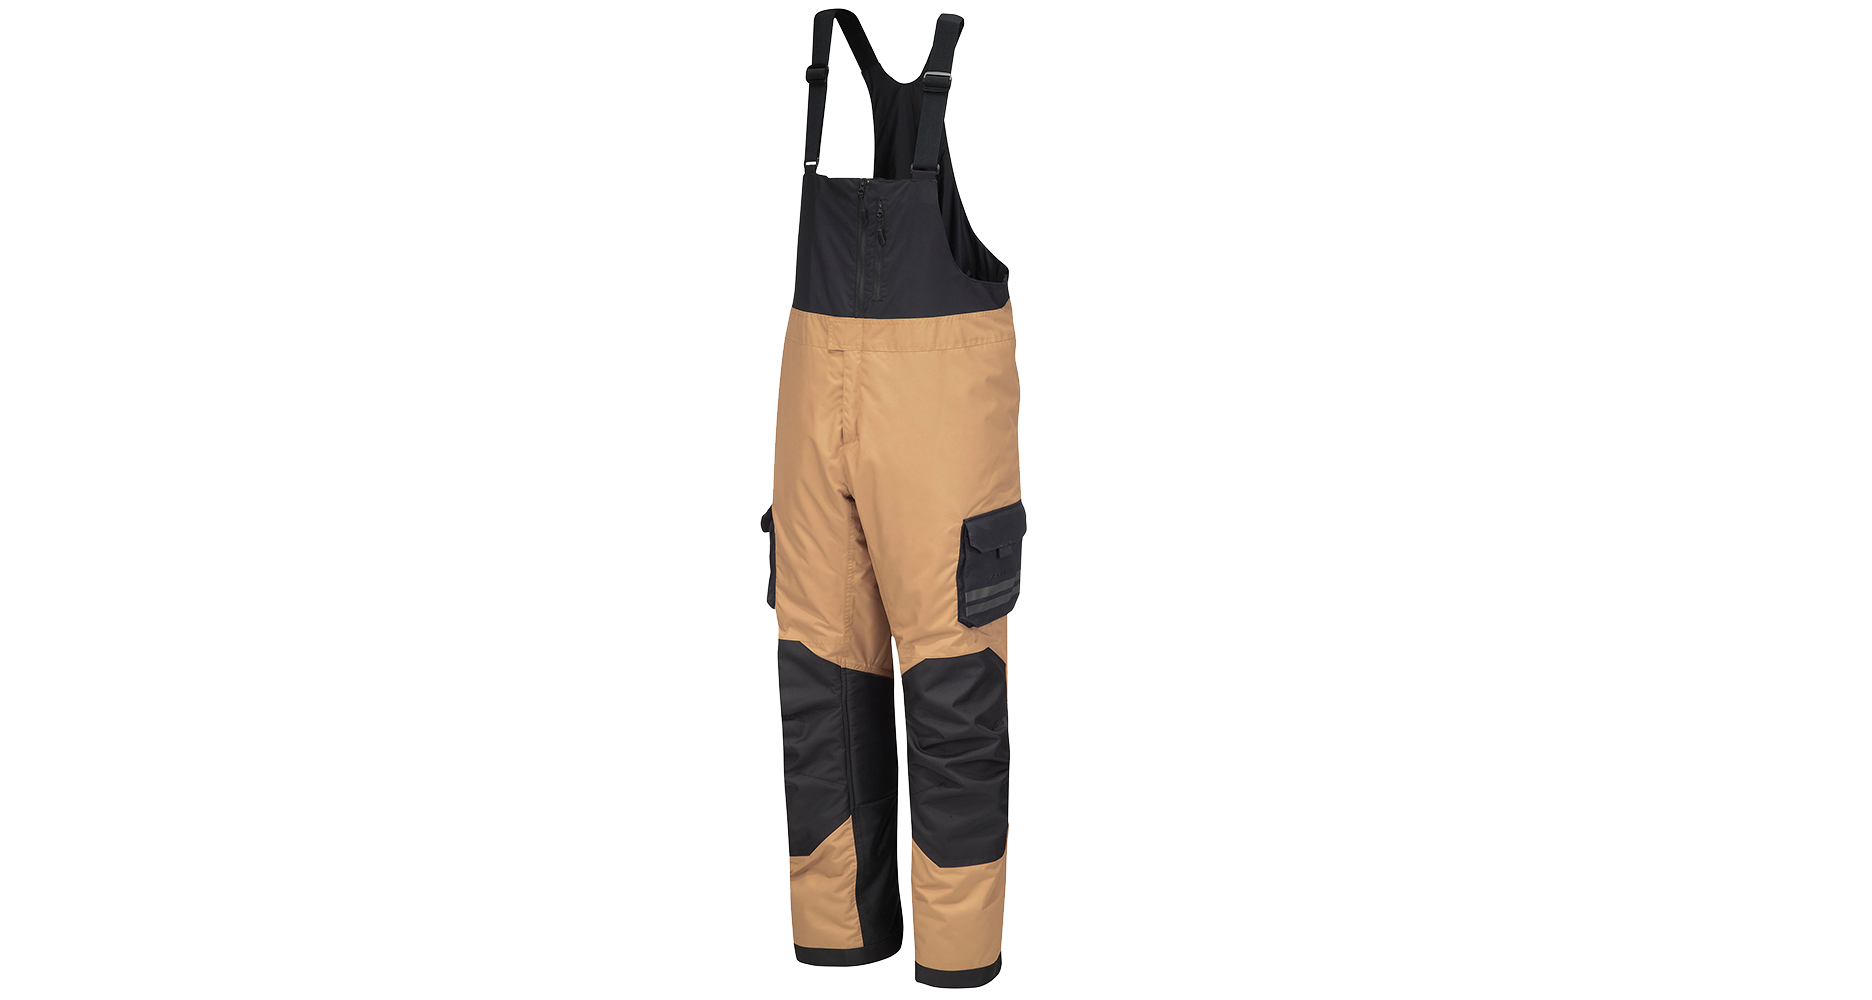 The Expedition Highpants have large cargo pockets and just the right amount of insulation to be the ultimate work and play pant